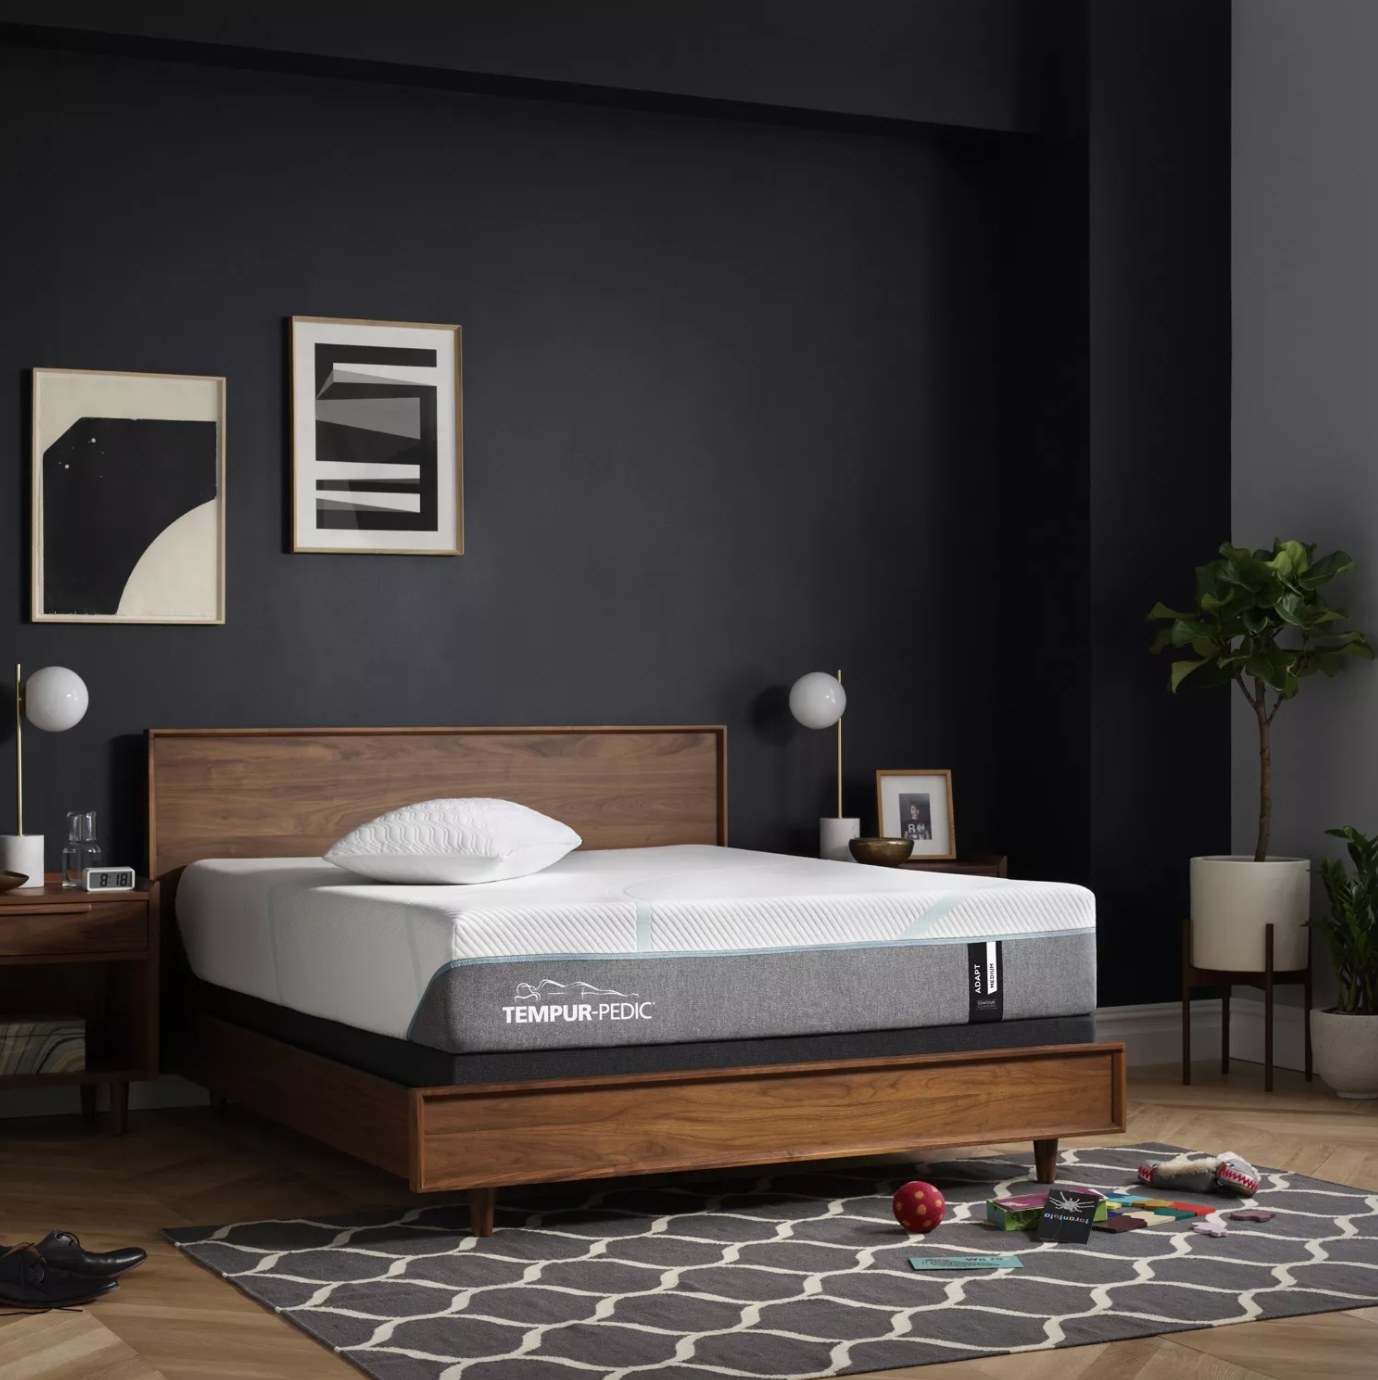 The pressure-relieving king-sized mattress on a wood bed frame